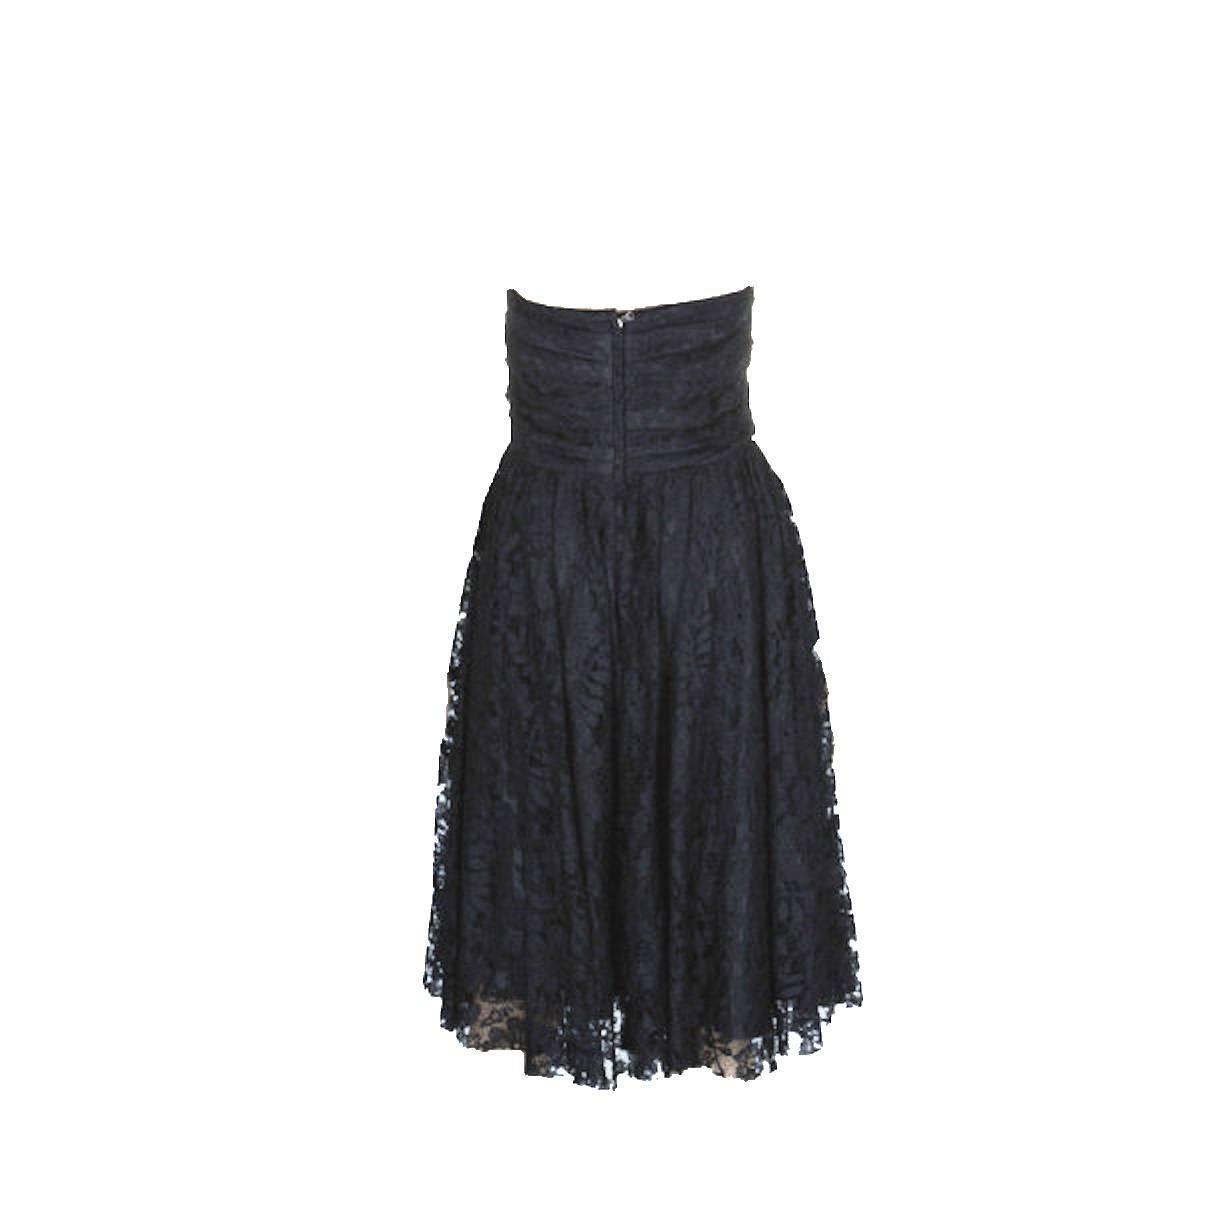 GORGEOUS DOLCE & GABBANA BLACK LACE DRESS

This beautiful dress is an absolute IT-PIECE and loved by Blake Lively, Tamara Ecclestone, Erin Heatherton and many other celebrities and top models as it is so ultra-glamouous

DETAILS:

    A DOLCE &